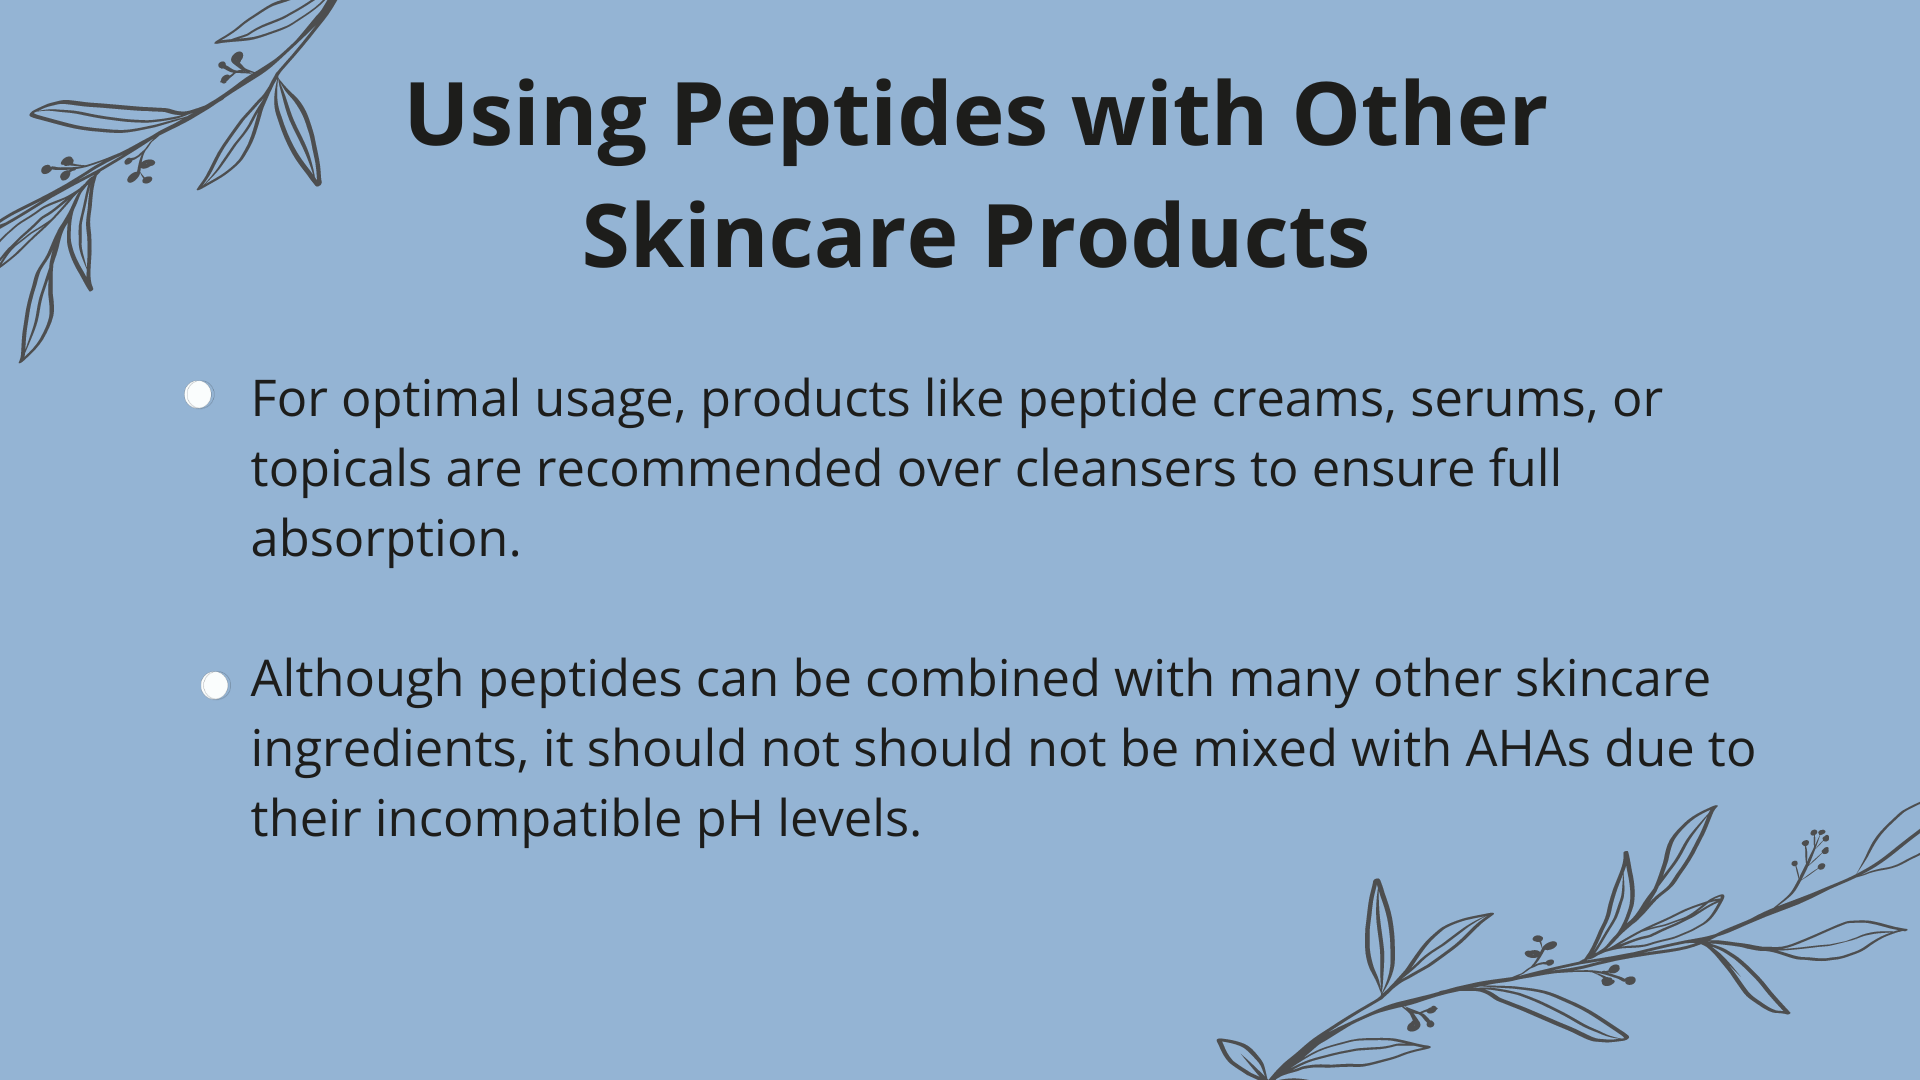 Using peptides with other skincare products